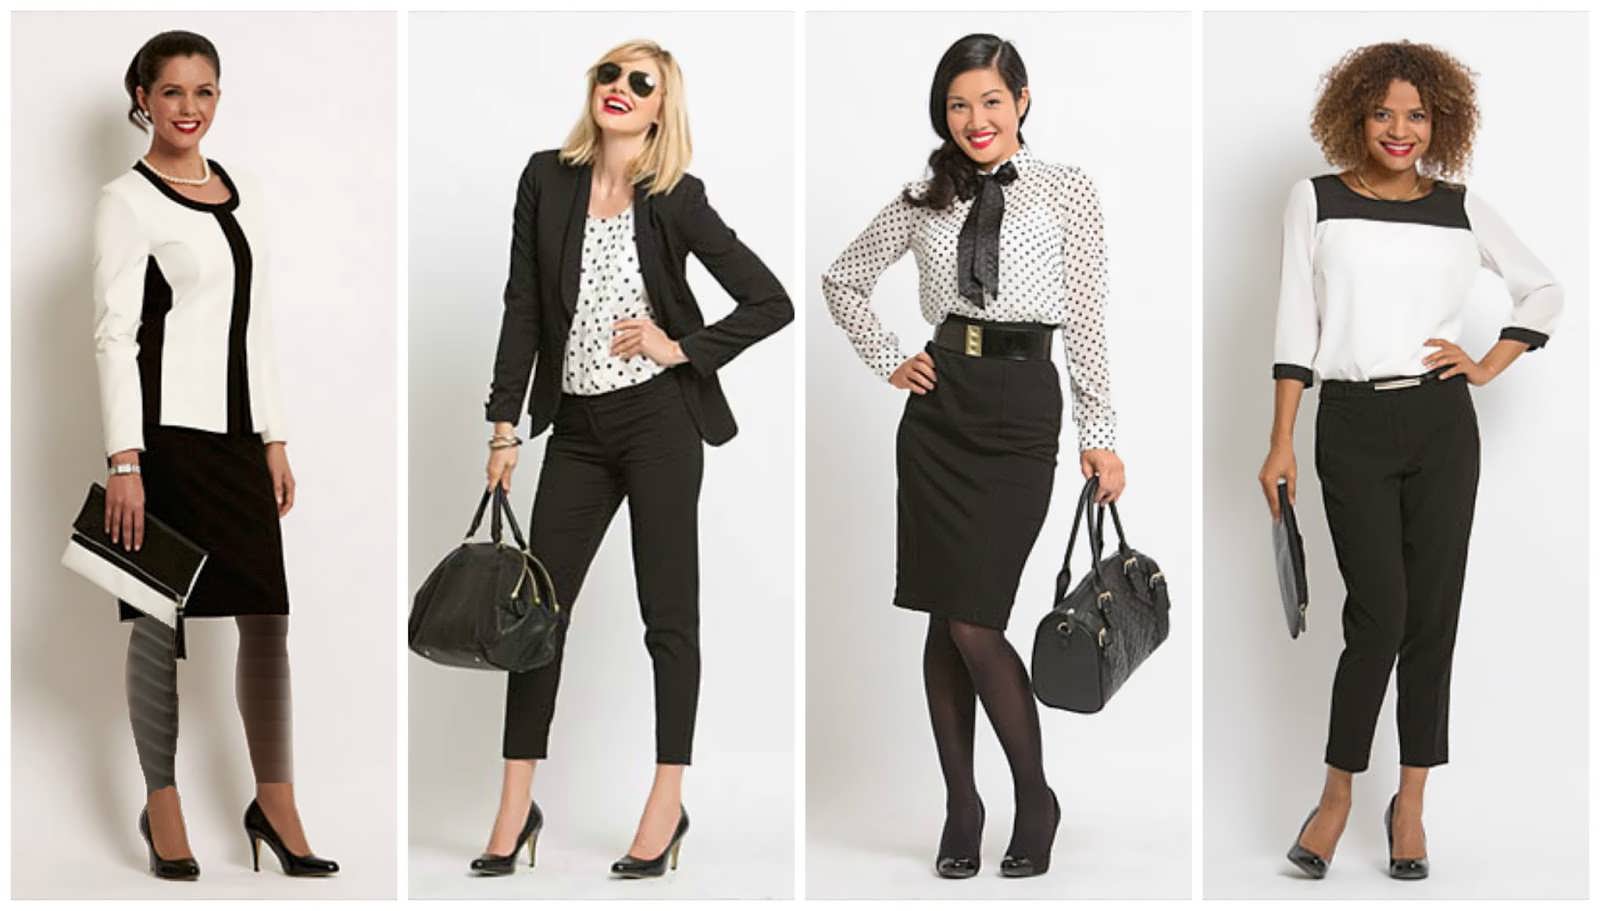 30 Best Interview Outfits for Women: Business Attire for Job Interviews